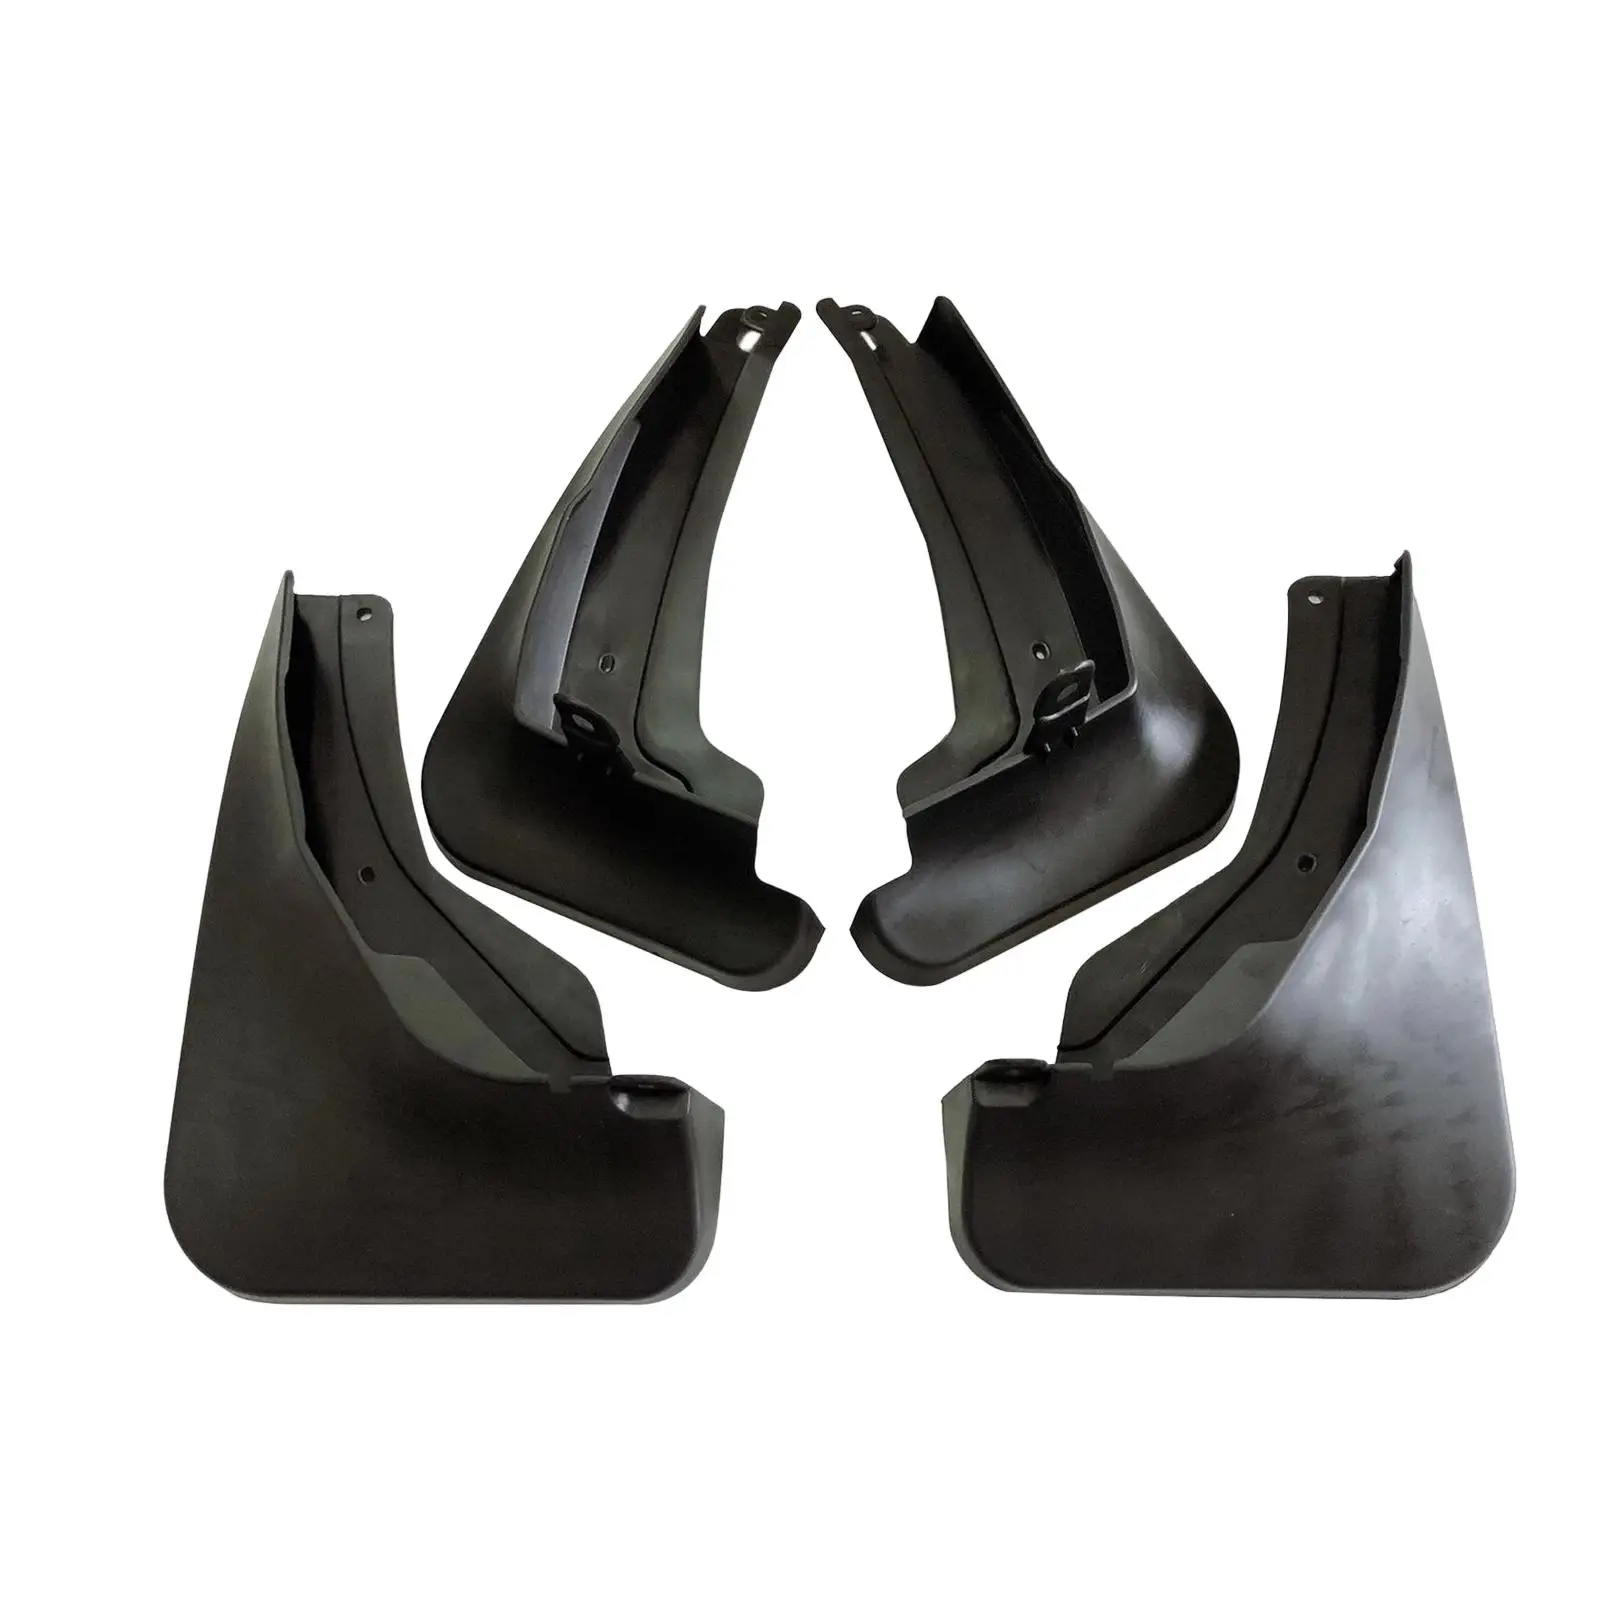 4x Car Mudguard Professional Replacement Mudflaps for Byd Song Plus Pro